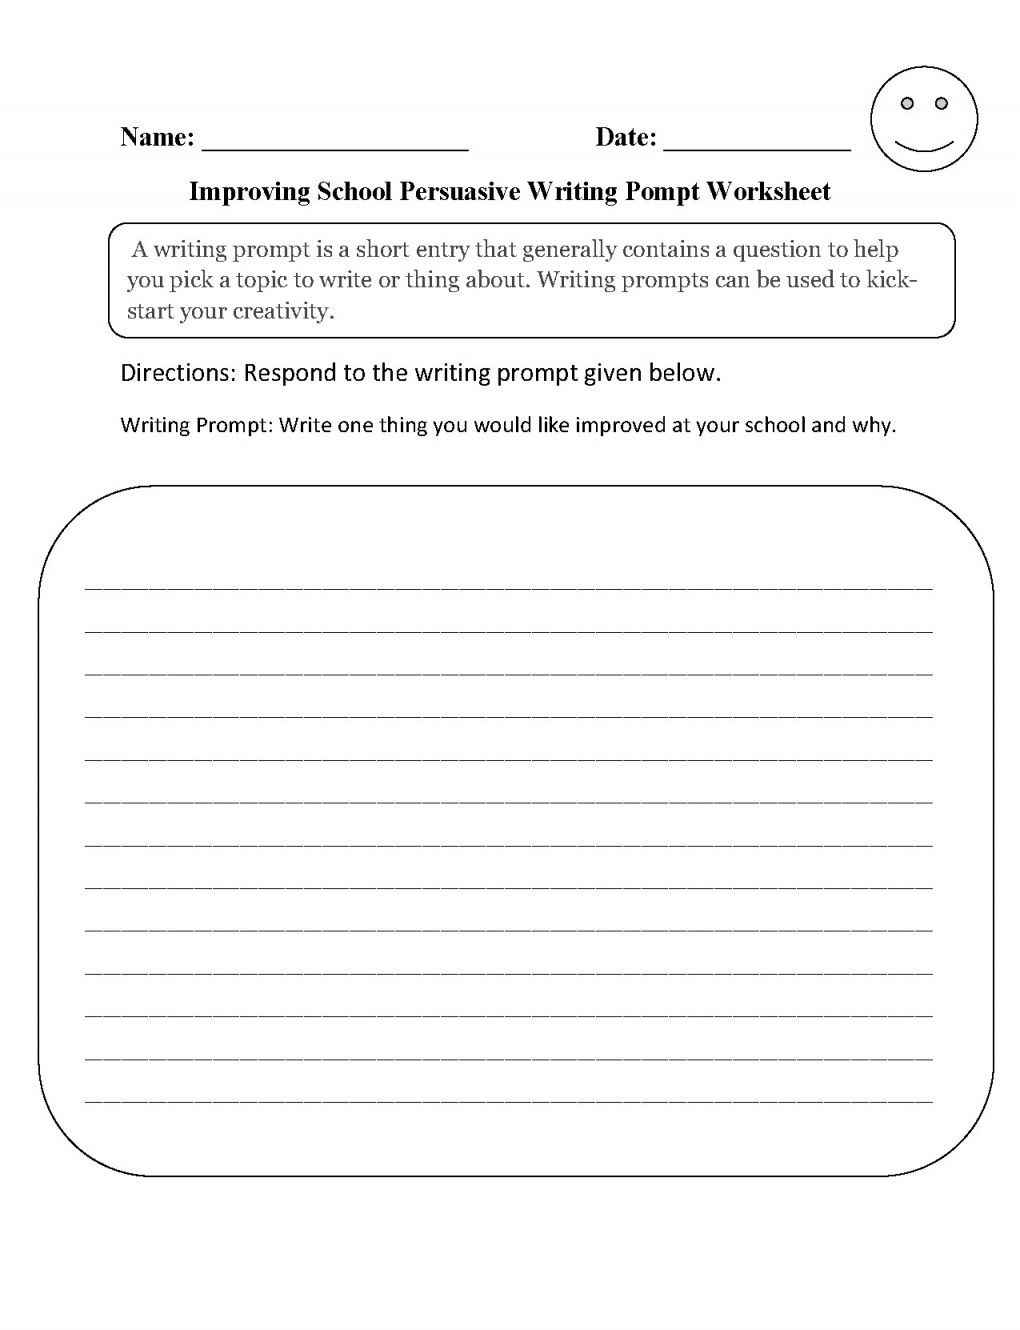 3rd-grade-writing-worksheets-best-coloring-pages-for-kids